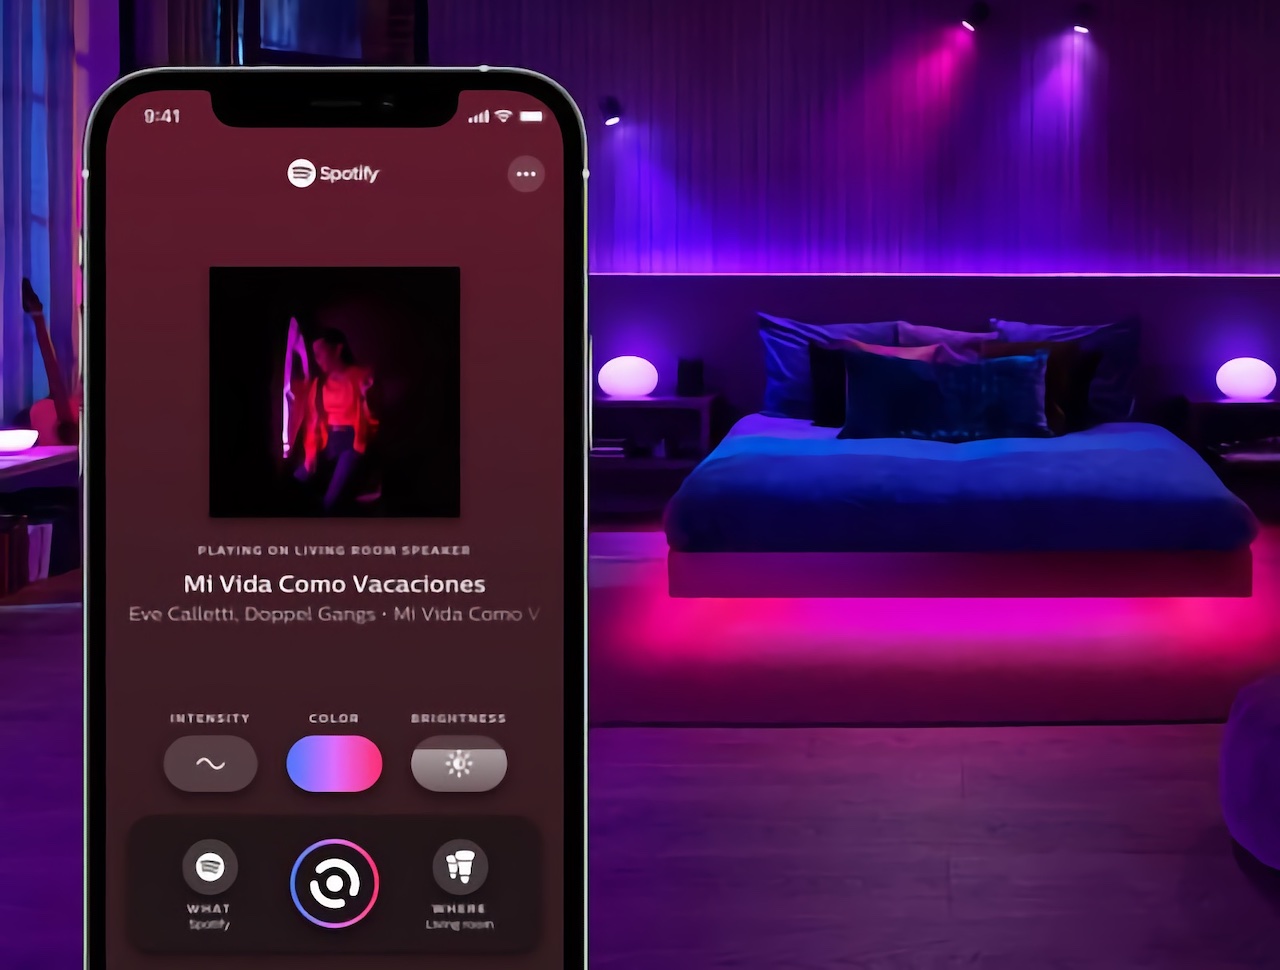 Philips Hue lighting can now sync directly with Spotify